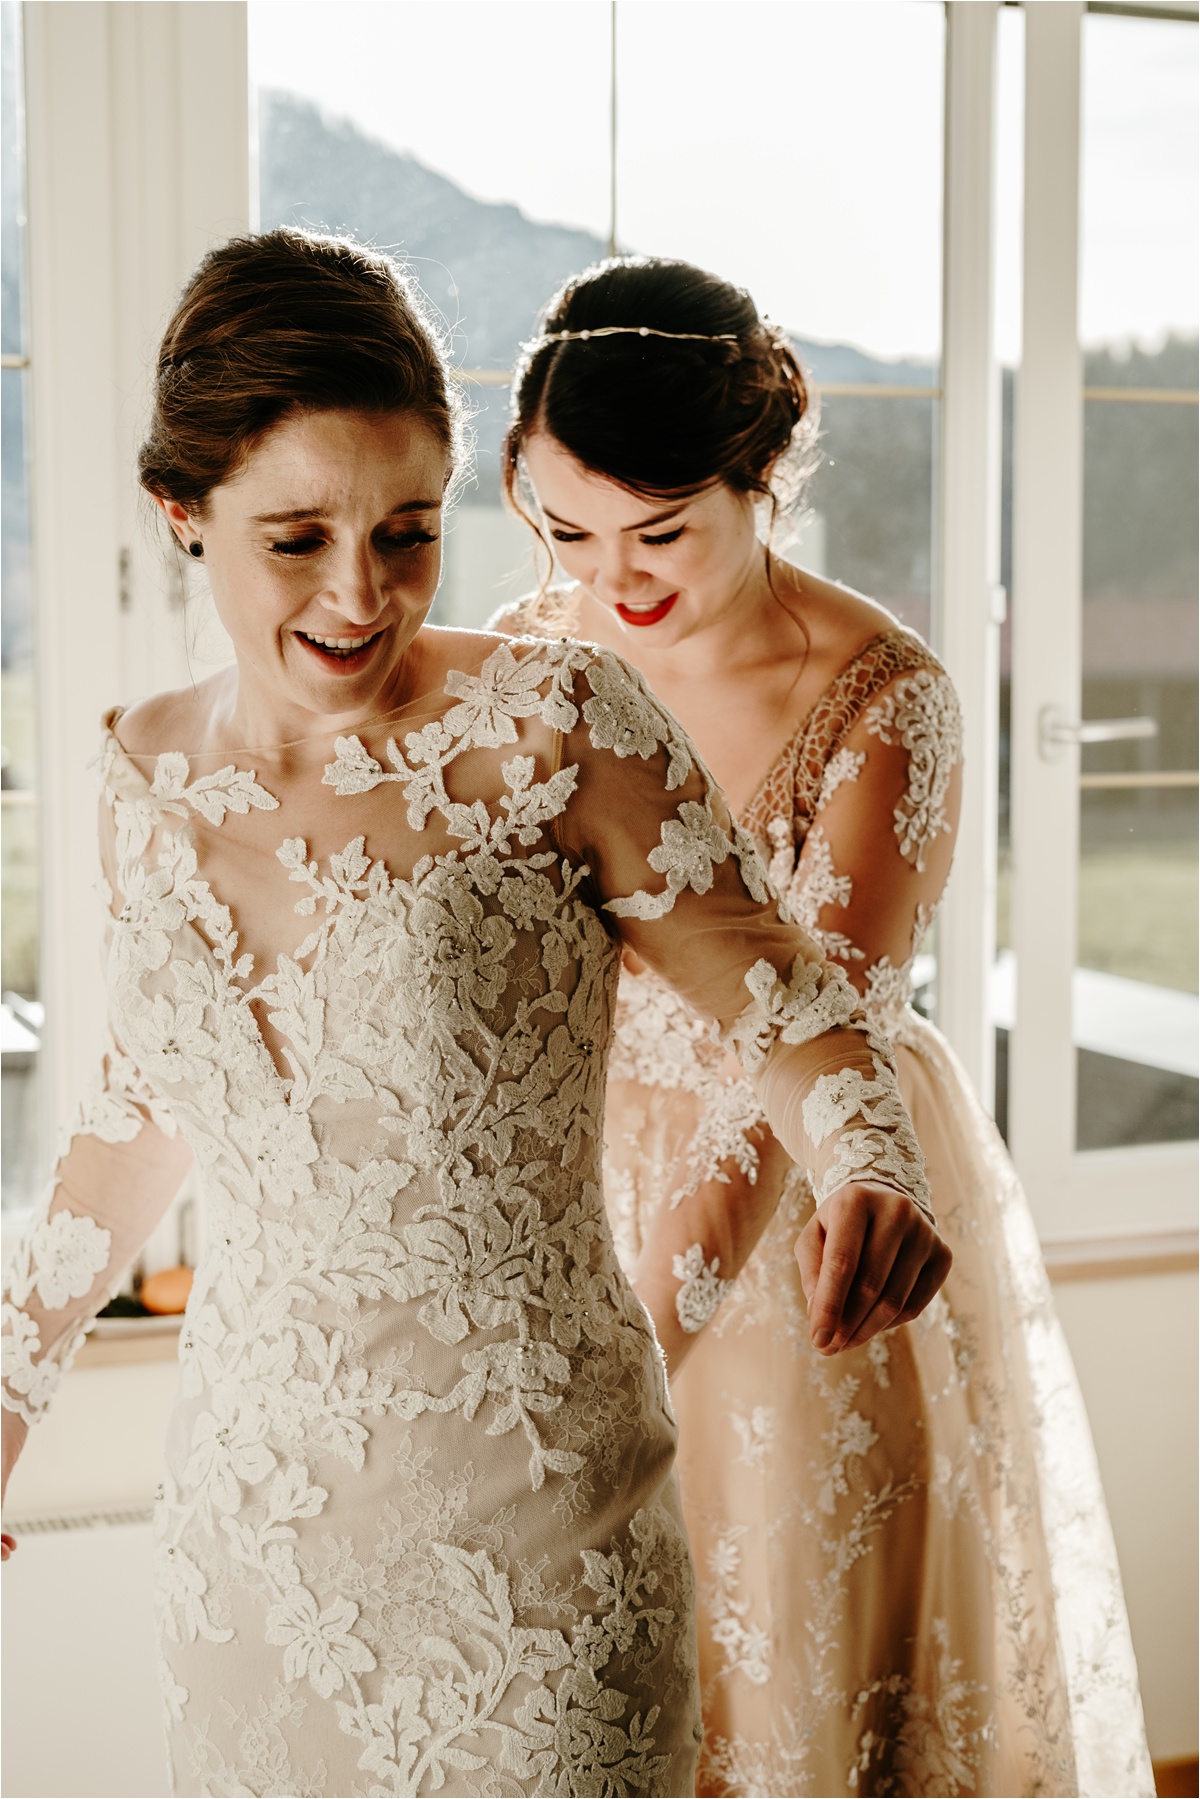 Two brides get ready for their wedding together. Photo by Wild Connections Photography